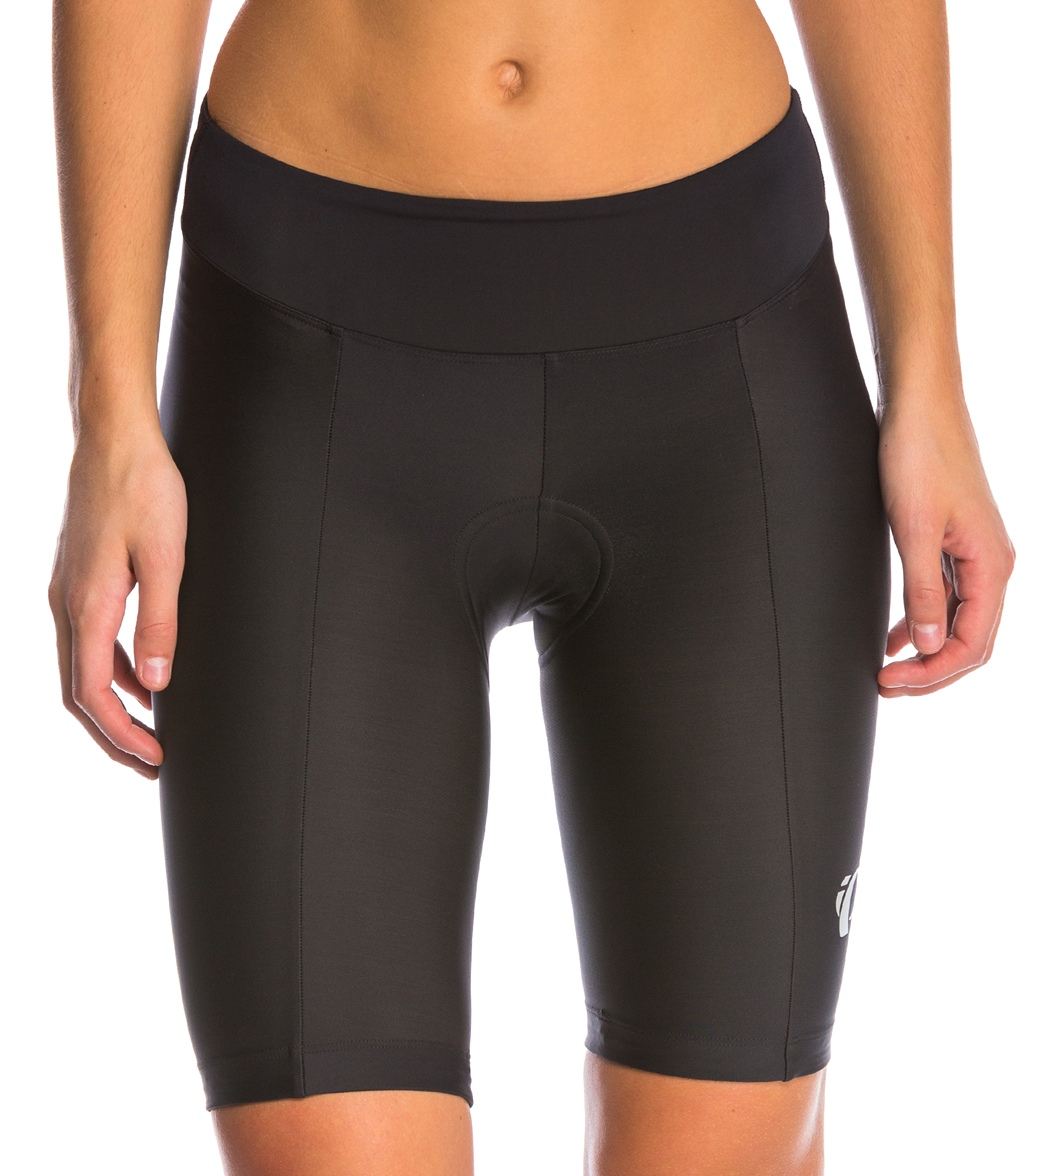 Pearl Izumi Women's Quest Cycling Short at SwimOutlet.com - Free Shipping